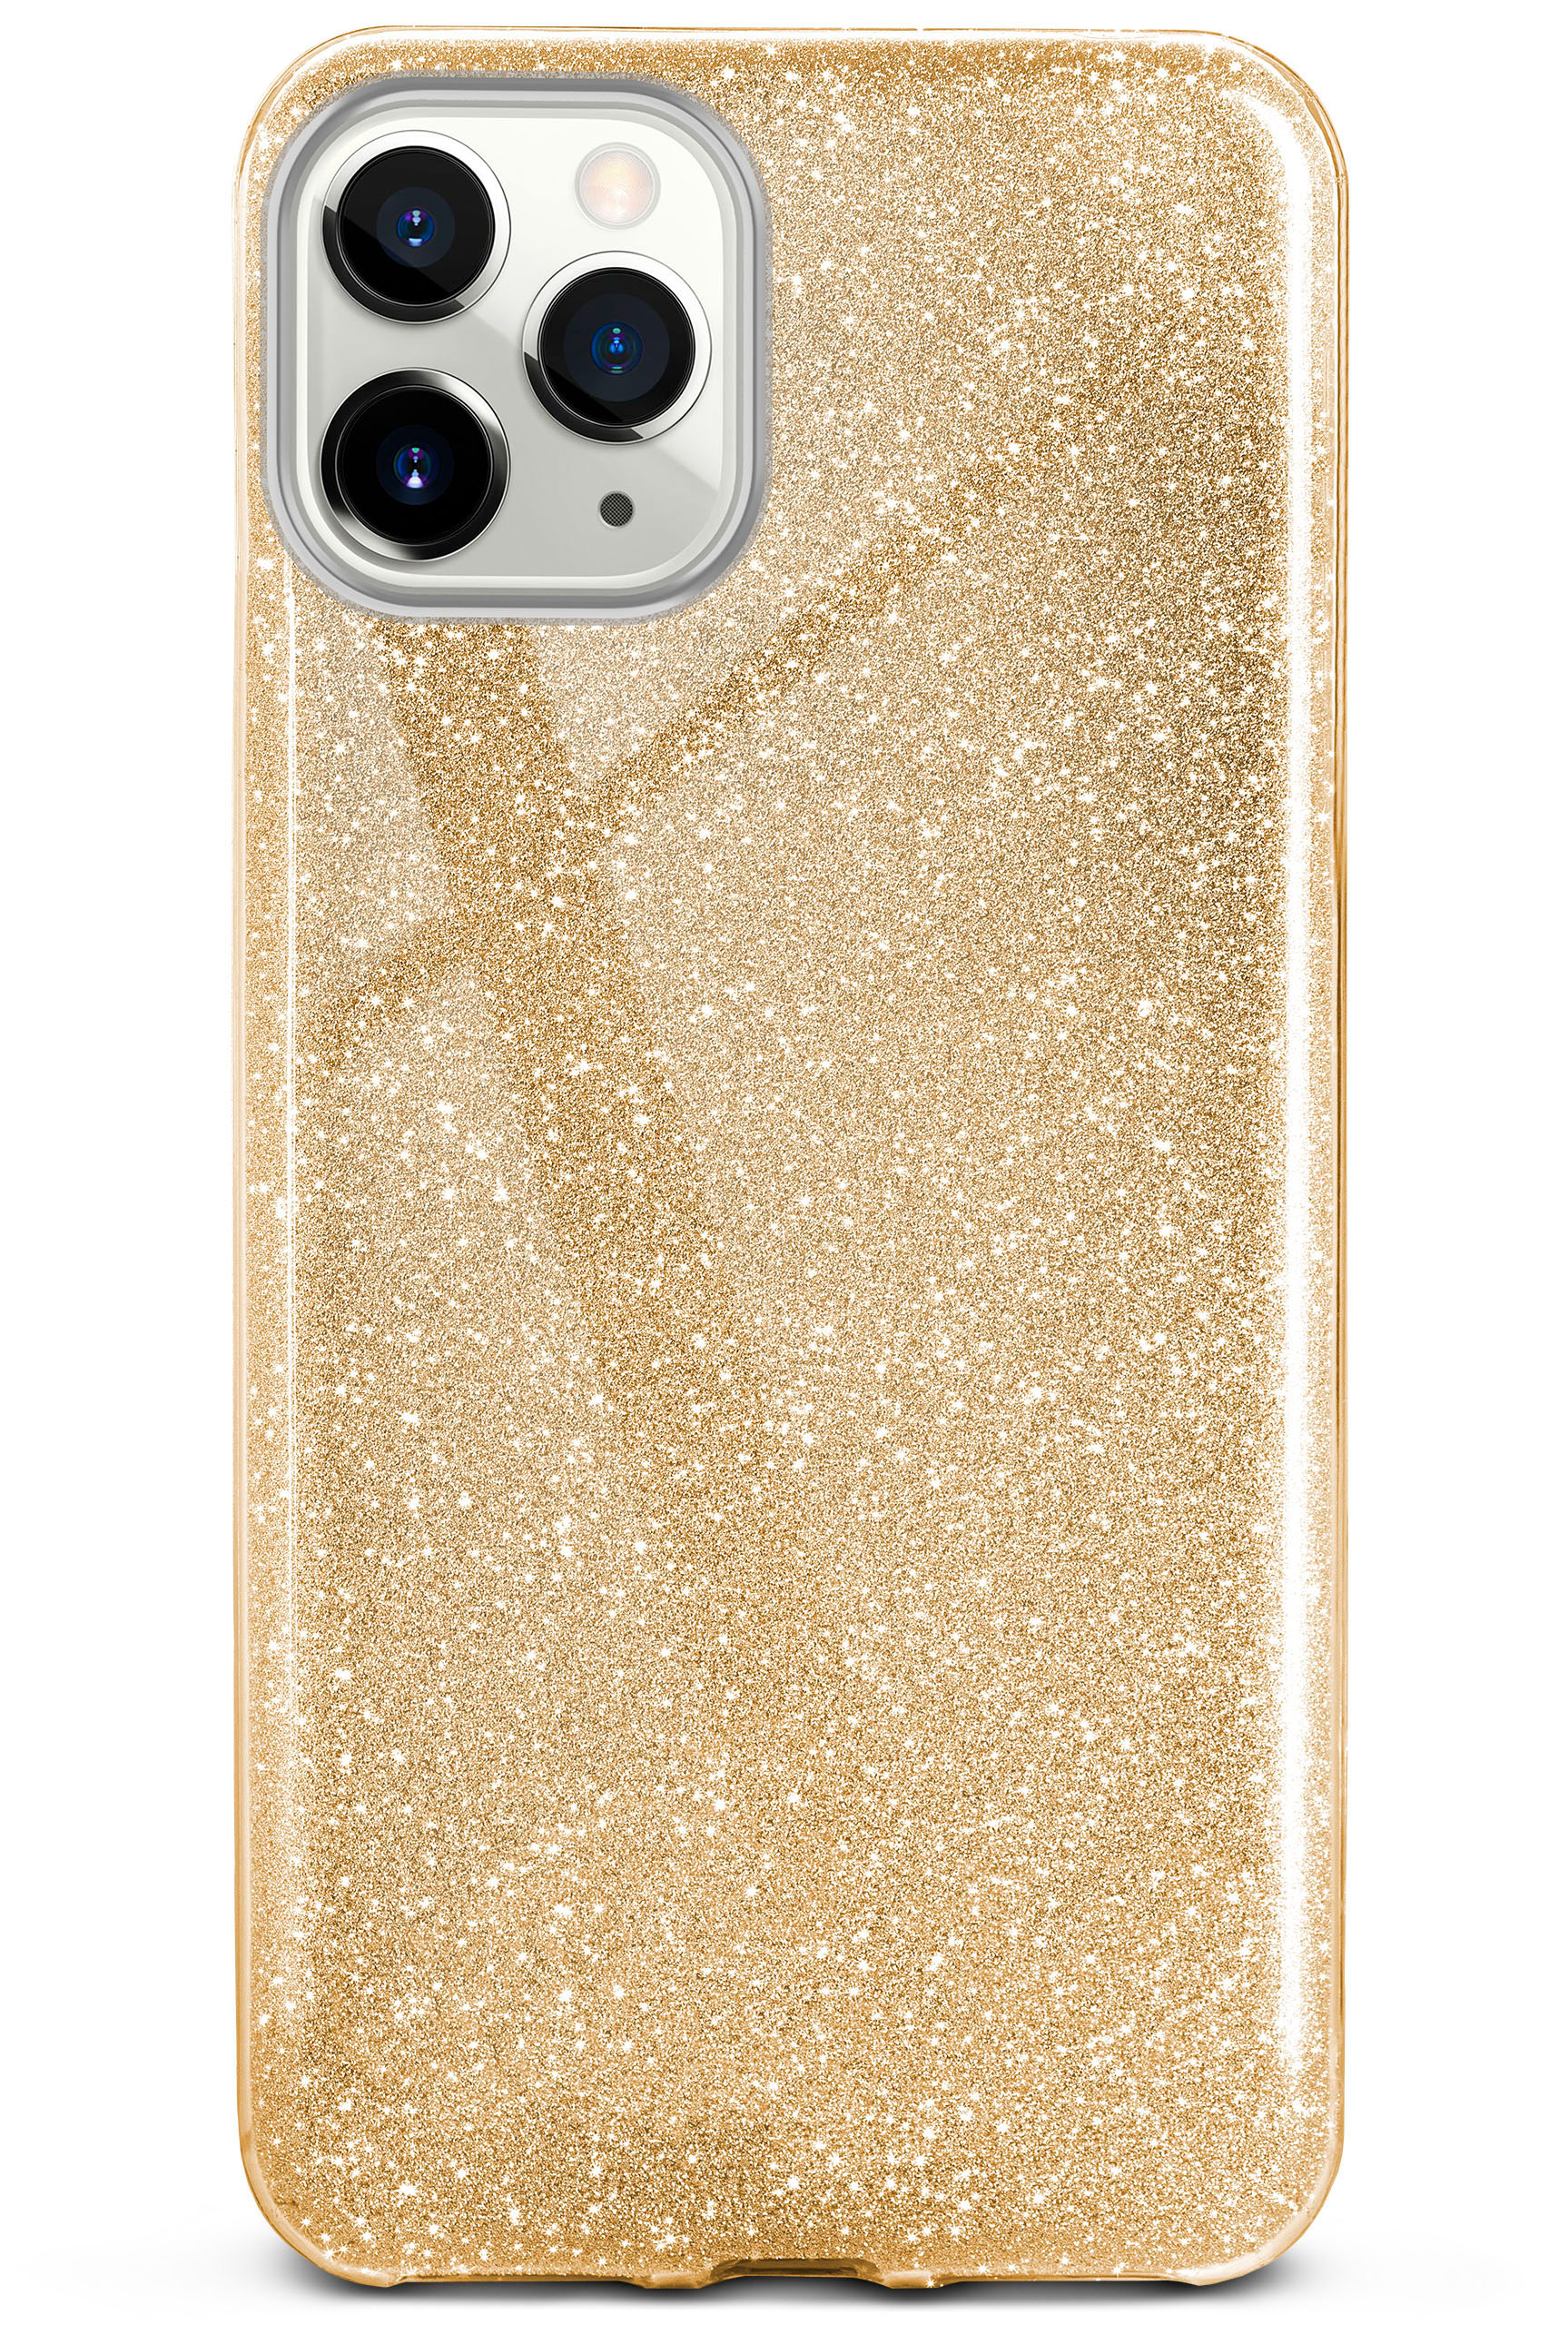 ONEFLOW Glitter Max, 11 Apple, Shine Backcover, - Gold Pro Case, iPhone